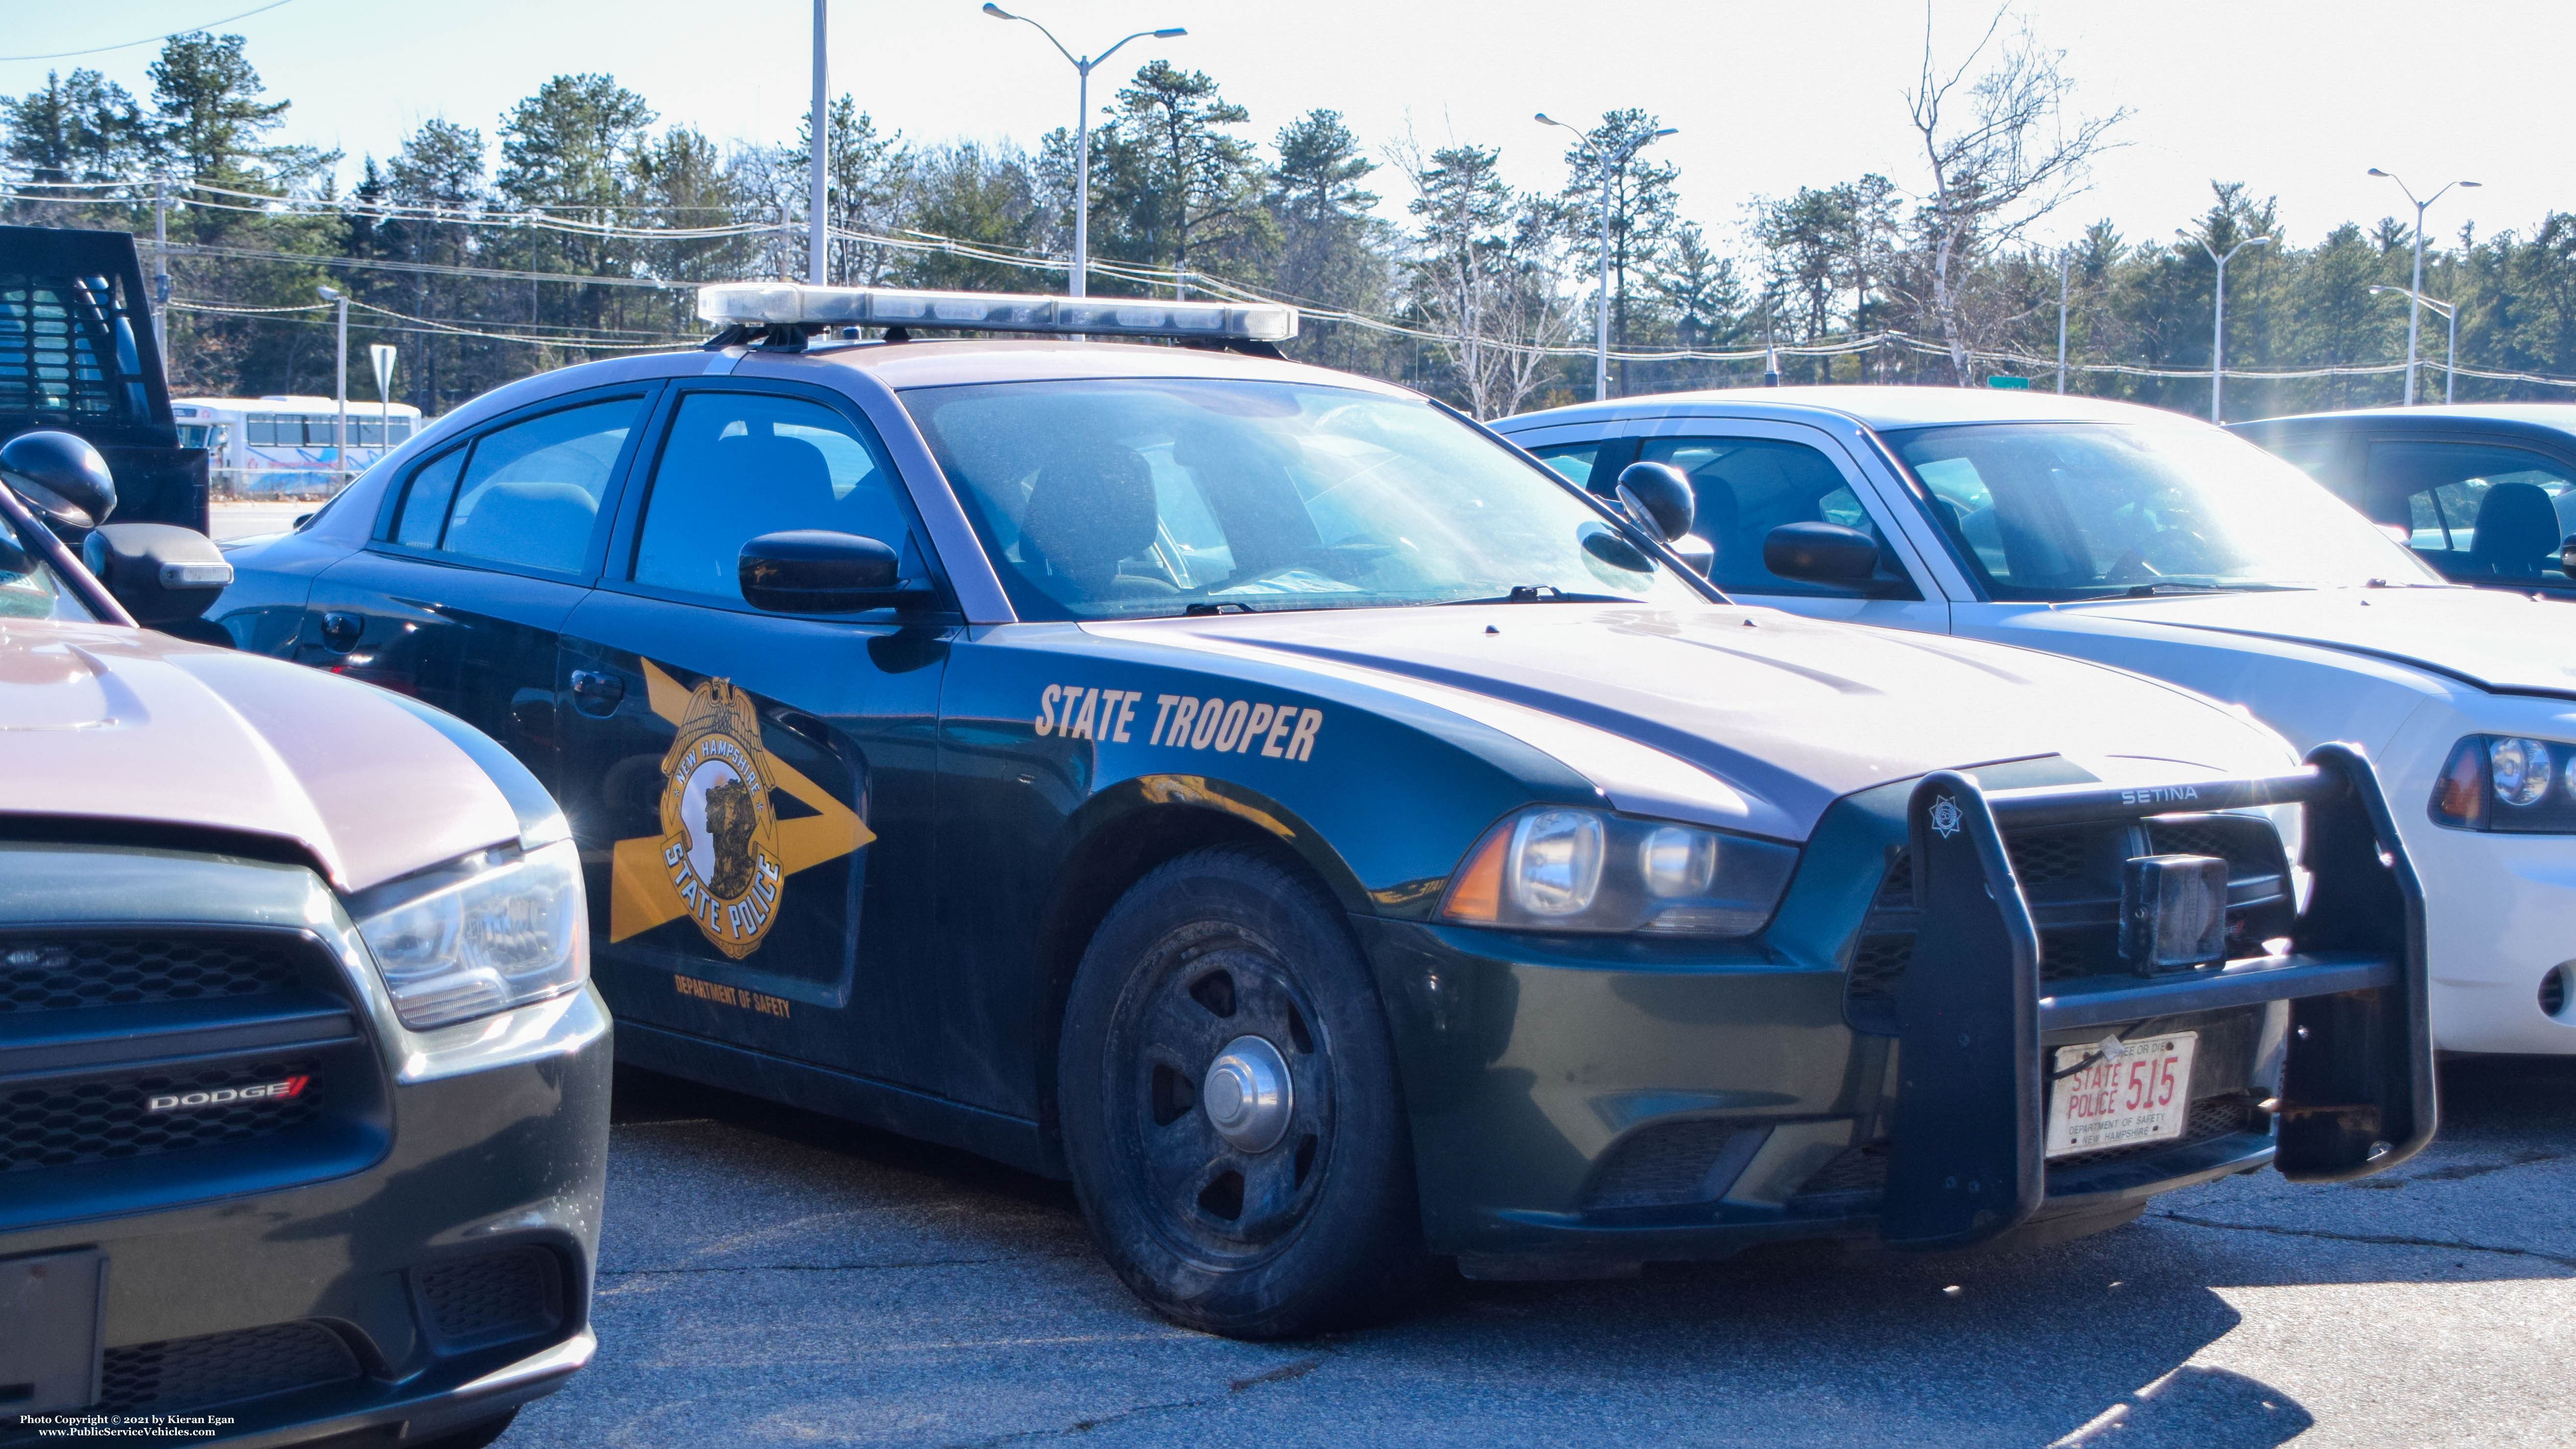 A photo  of New Hampshire State Police
            Cruiser 515, a 2011-2014 Dodge Charger             taken by Kieran Egan